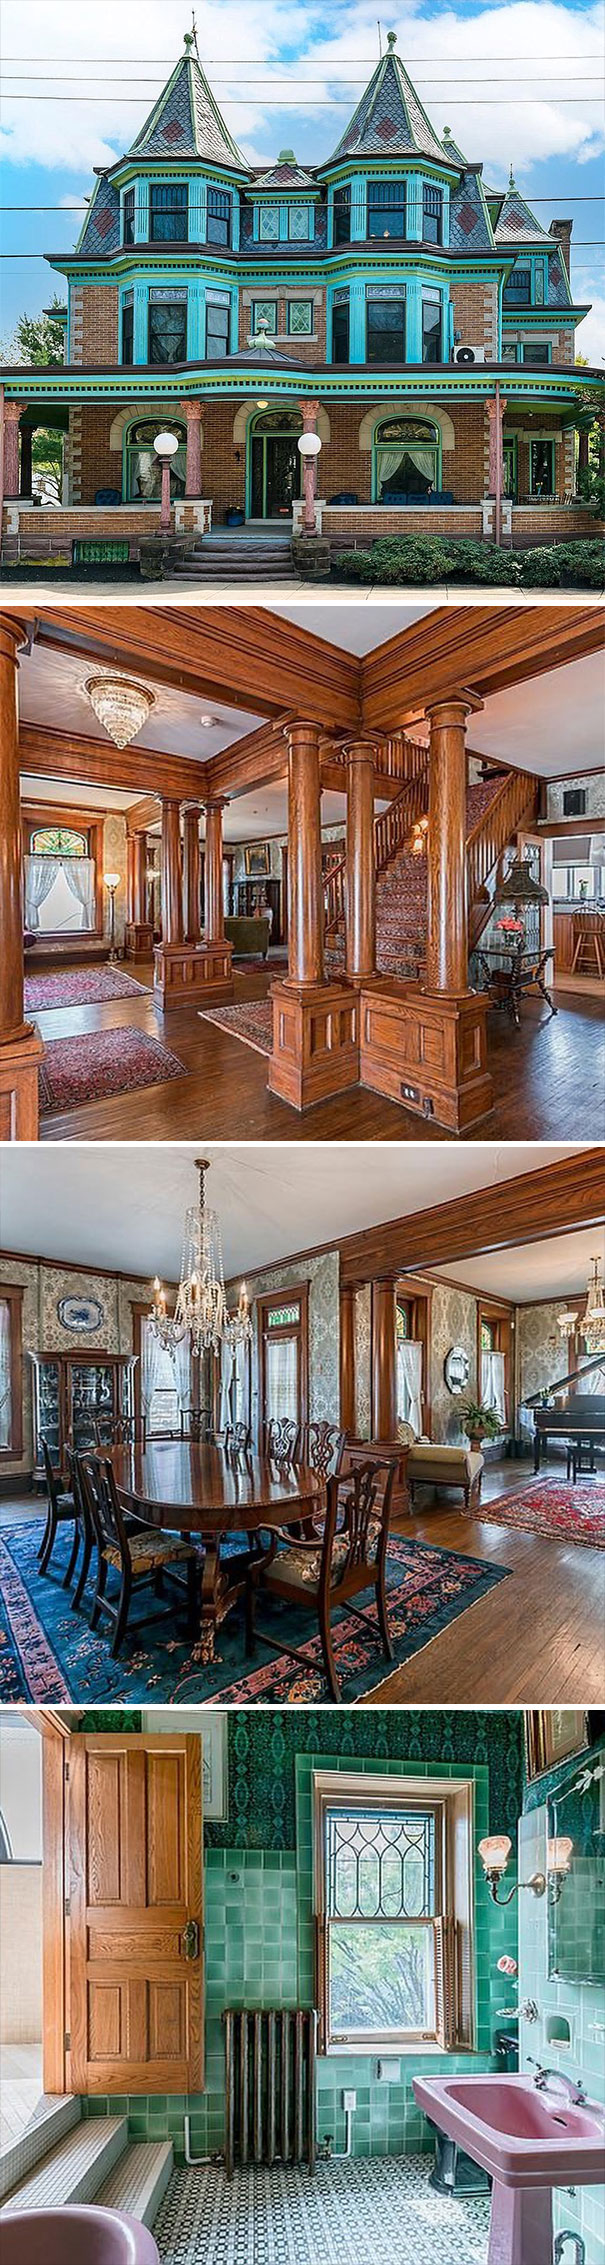 Here’s A Cool Home In Adamstown, Pa That Used To Be Two Homes That Were Connected To Each Other. $725,000